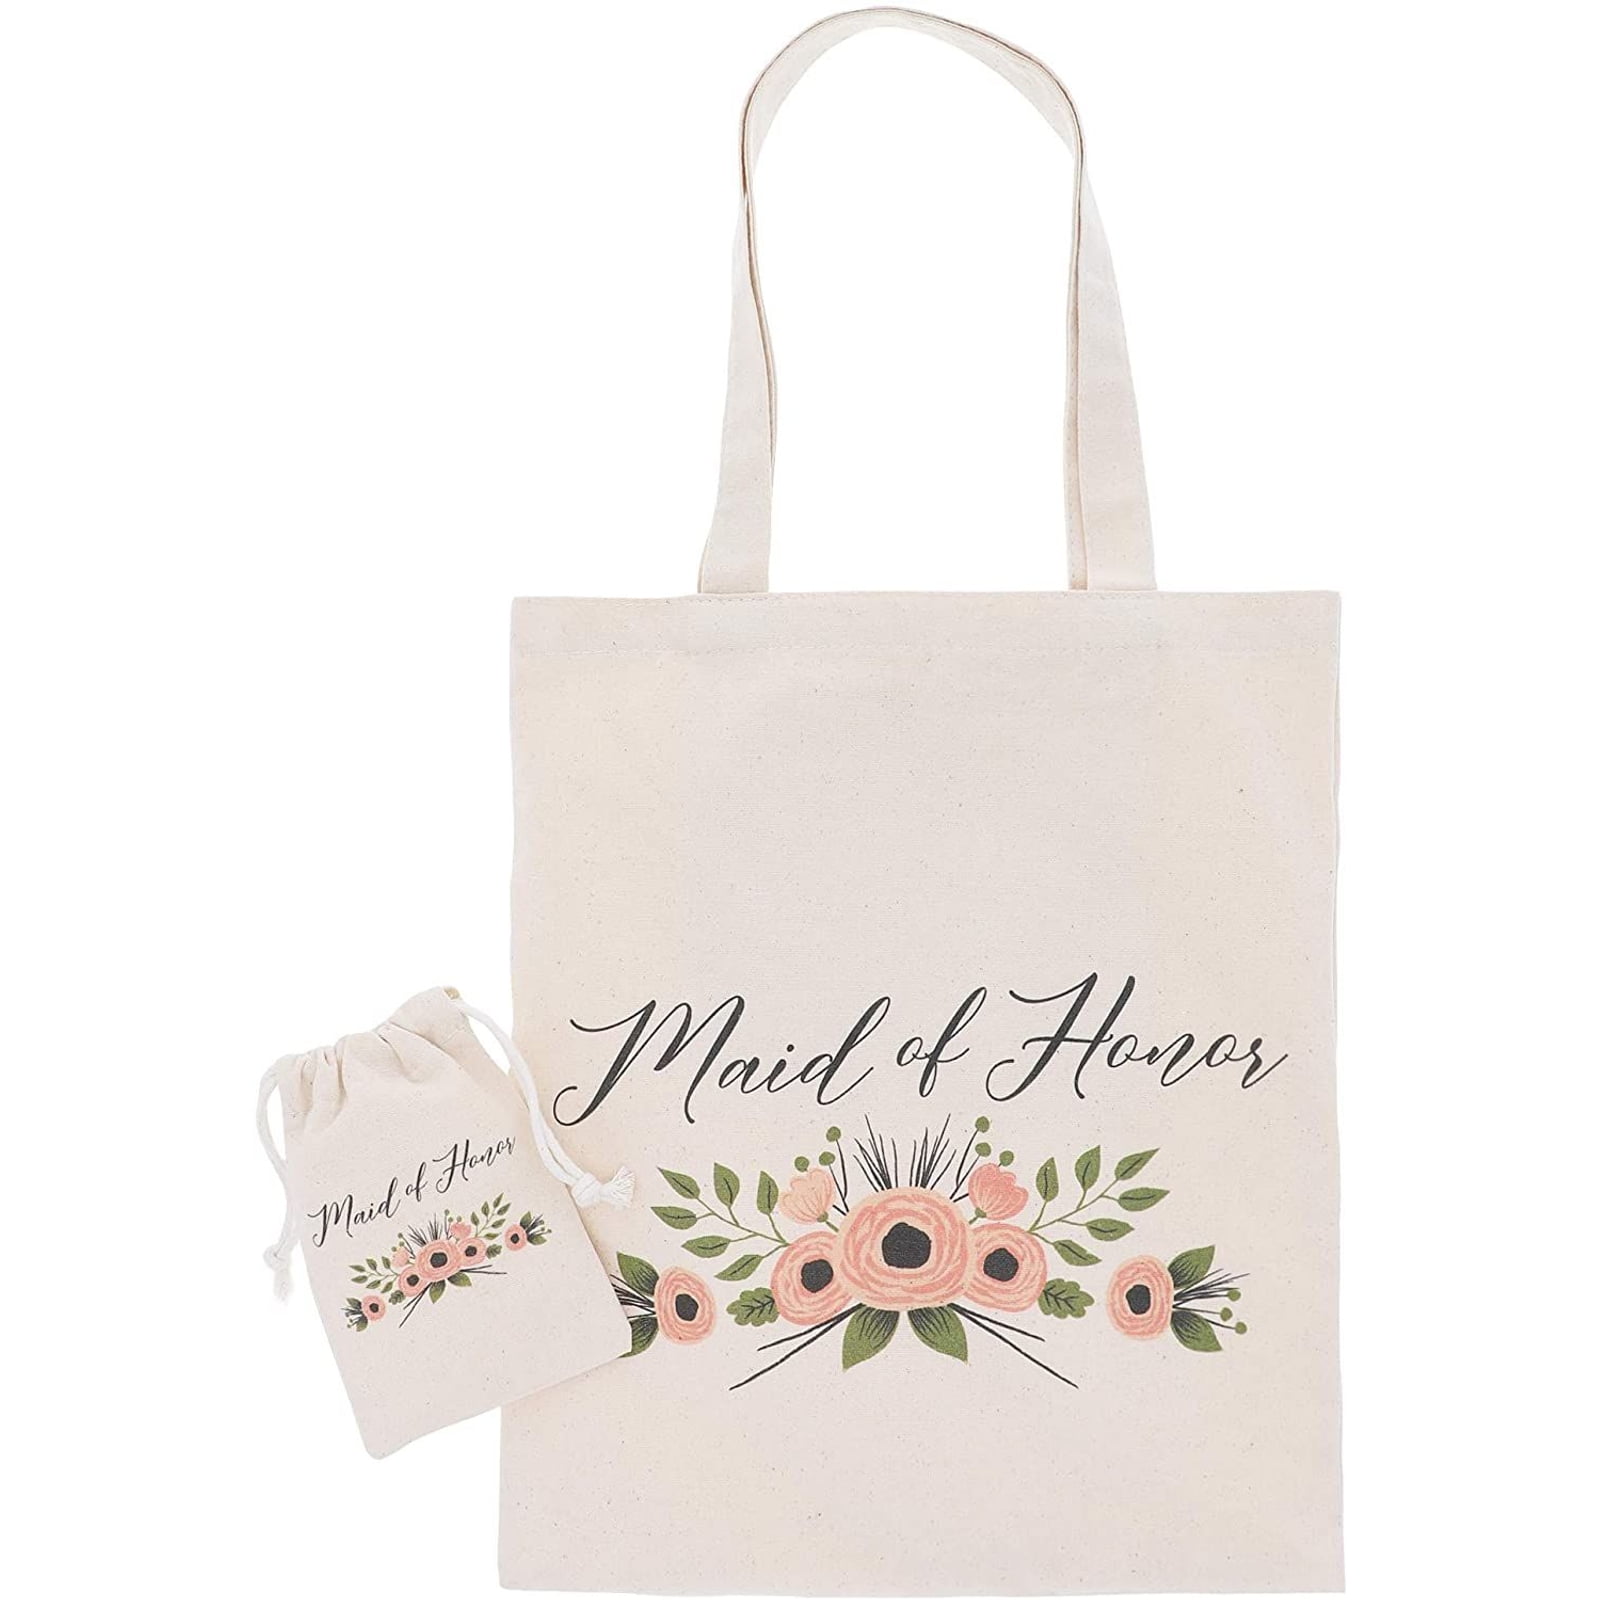 Wedding Party Gift Floral The Bride Cotton Tote Bag 